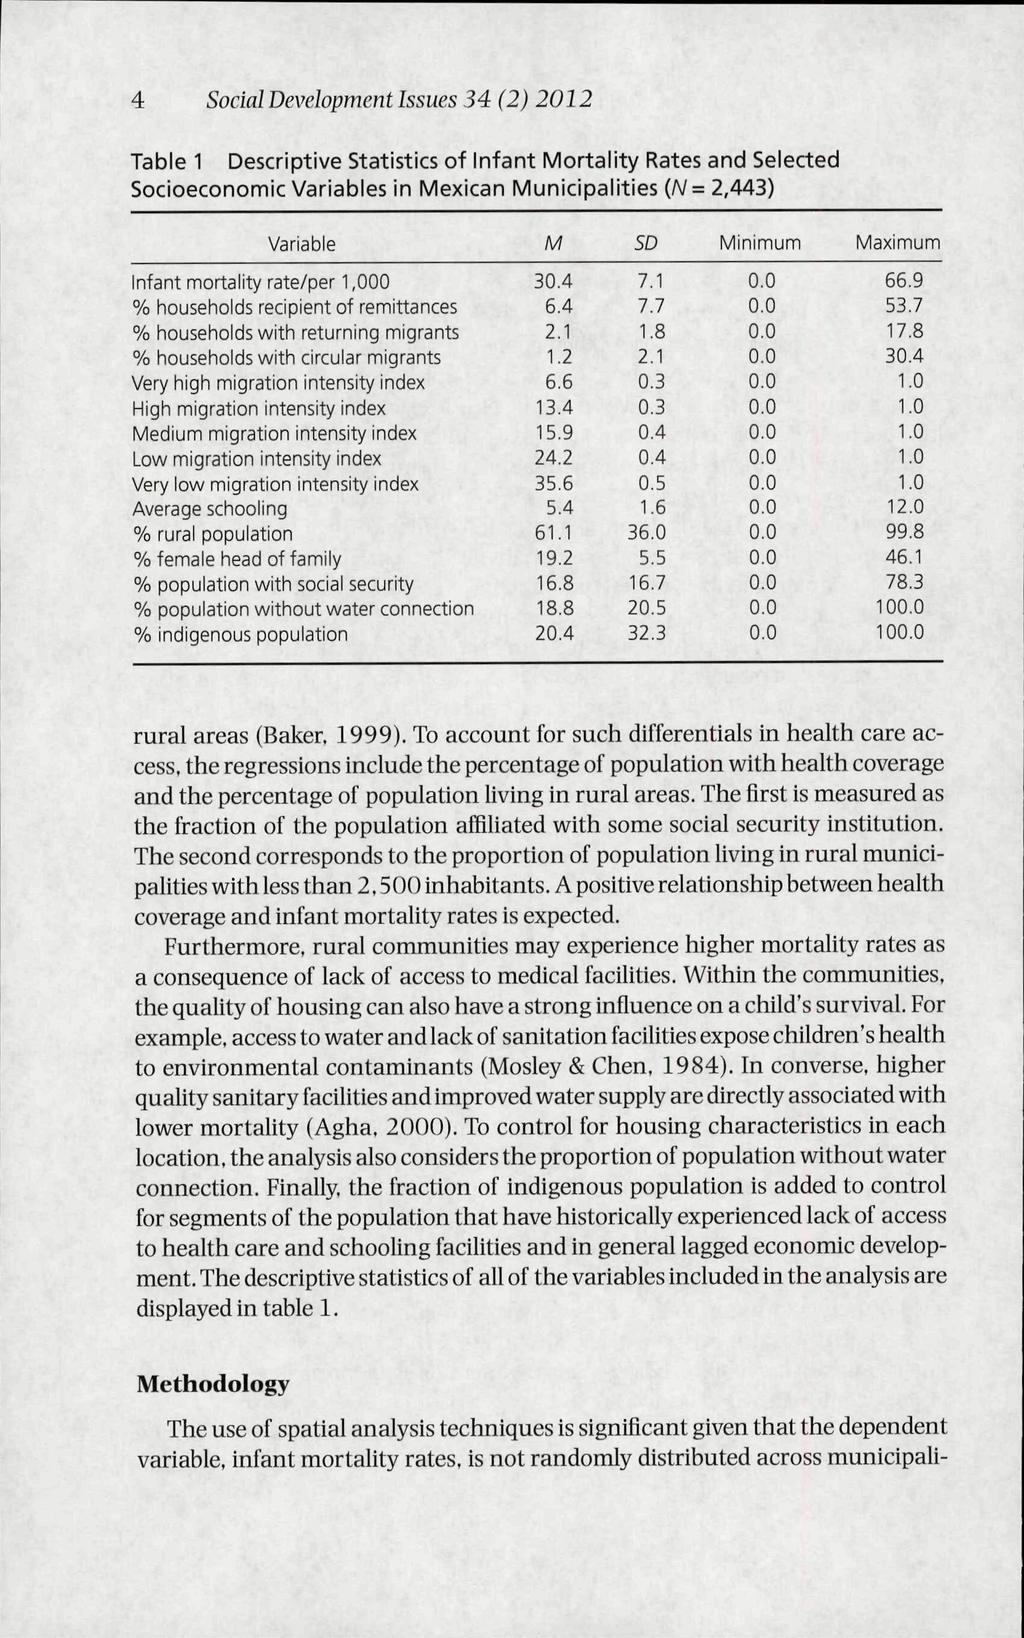 4 Social Development Issues 34 (2) 2012 Table 1 Descriptive Statistics of Infant Mortality Rates and Selected Socioeconomic Variables in Mexican Municipalities (N= 2,443) Variable M SD Minimum